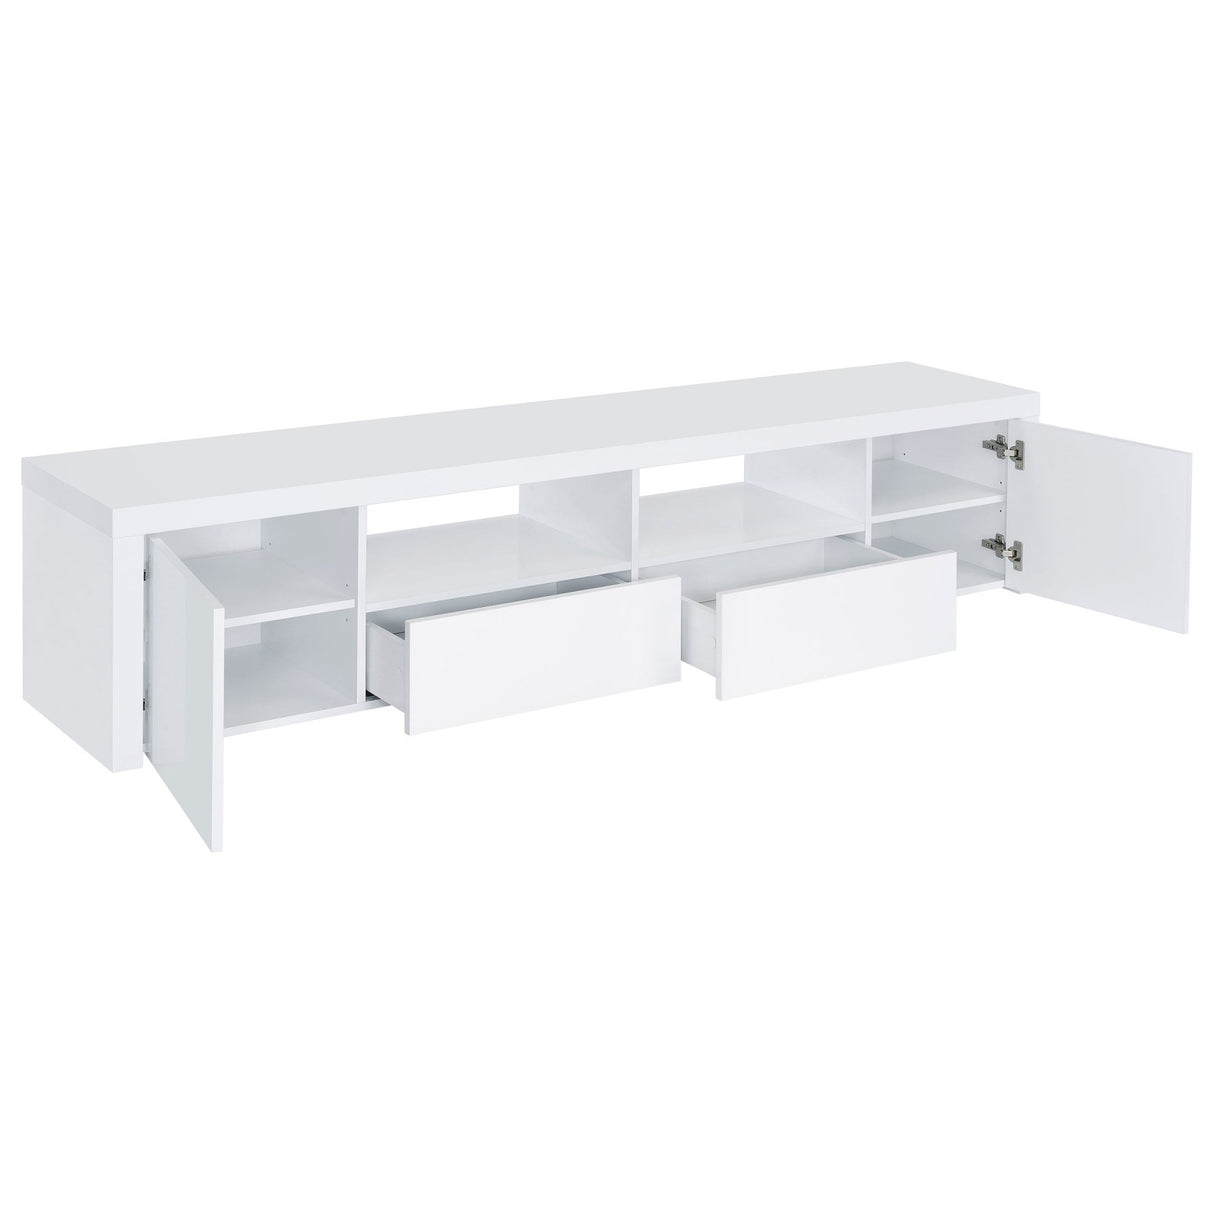 79" Tv Stand - Jude 2-door 79" TV Stand With Drawers White High Gloss